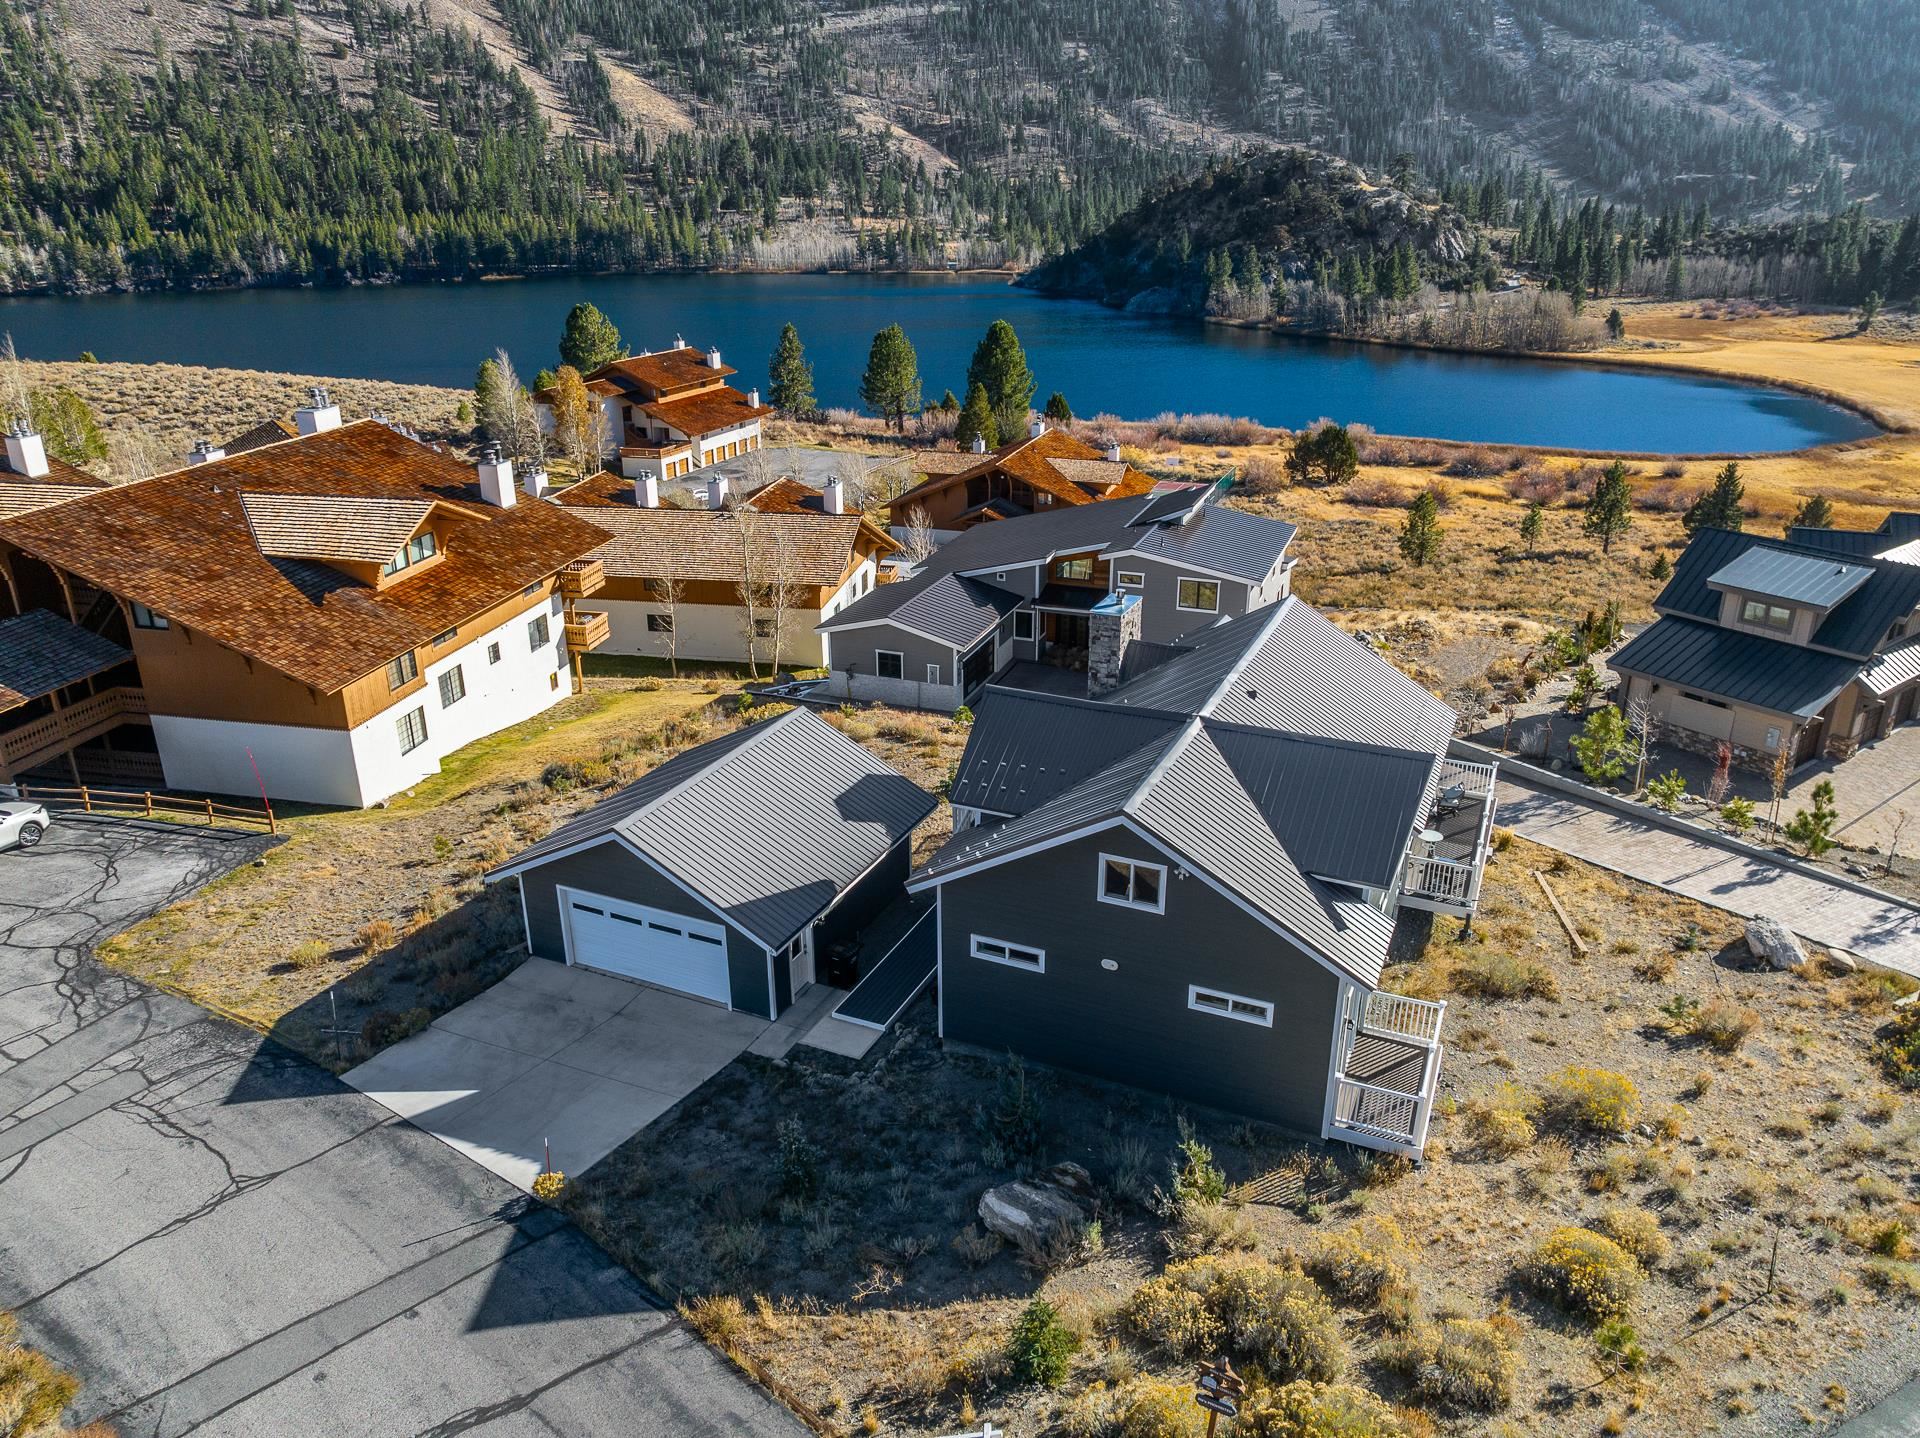 Located in the sought-after Highlands neighborhood of June Lake, this custom 2-bedroom + oversized loft home offers a perfect blend of comfort and scenic beauty. Enjoy amazing views of Gull Lake and the gorgeous surrounding mountains in this move-in ready home suitable for either full-time living or a vacation retreat.  Enter on the main level, where an abundance of natural light shines through large south-facing windows providing warmth in the living, dining, and kitchen areas. The open kitchen includes “butcher block” counter tops, a beautiful pebble backsplash and stainless appliances. The vaulted ceilings and a free-standing gas log fireplace enhance the open and inviting atmosphere, perfect for relaxation or entertaining. Also on the main level is the Primary Suite with a private deck and a gorgeous tile bath.  The second bedroom featuring bathroom access is also on this level along with convenient laundry closet. Both bathrooms and the entry boast heated floors for added comfort.    Upstairs you will find an oversized loft, offering ample sleeping space or convert this space to a game room, office, or additional living space. Smart thermostats, exterior cameras, and electronic lock entry enhance the home's modern convenience.  The large deck with fire pit is perfect to relax and enjoy the views after a day of outdoor fun.  A detached 2-car garage provides ample space for vehicles or outdoor gear. The location of this home is unbeatable, surrounded by outdoor recreational opportunities, including skiing at June Mountain, fishing in nearby lakes such as Gull, June, Silver, and Grant, and exploring numerous hiking trails. The prime position in the coveted June Lake Highlands ensures both breathtaking natural surroundings and easy access to local amenities, shops, and restaurants. Mammoth Lakes, just 20 minutes away, adds an extra layer of convenience.  This furnished home is move-in ready making it available to enjoy now.  Nightly rentals are not allowed.